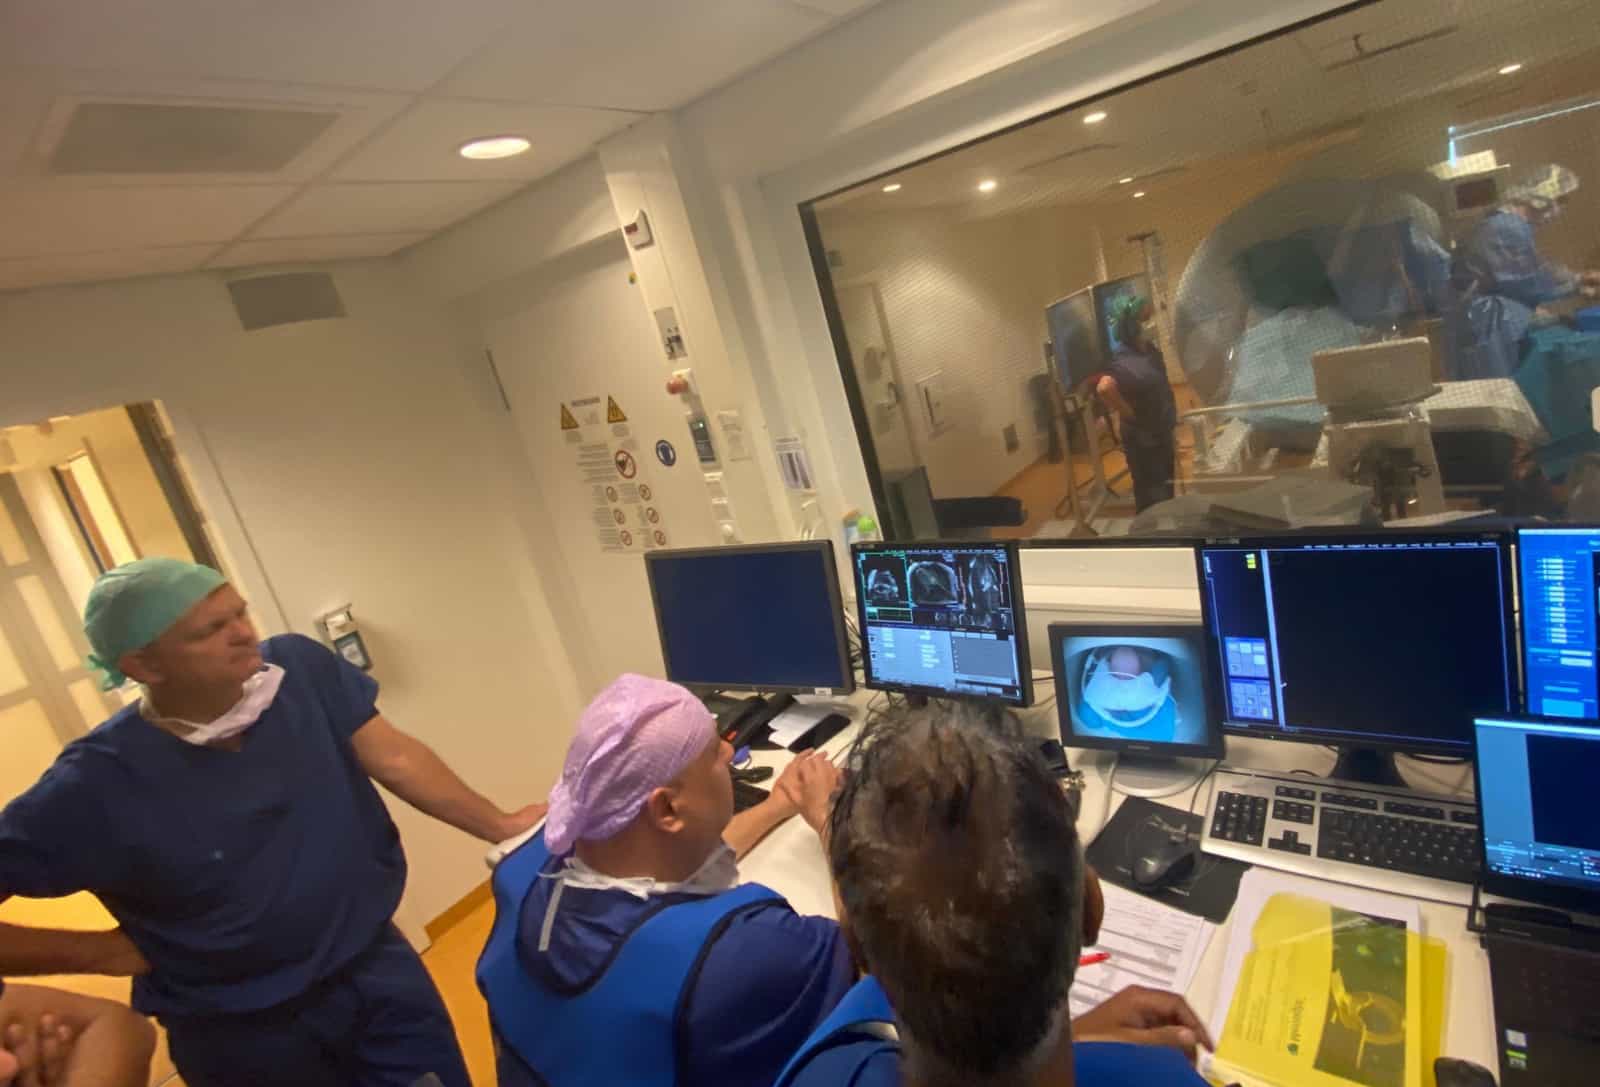 Amsterdam UMC Becomes First to Perform Cardiac Catheter Ablation in Diagnostic MRI Lab